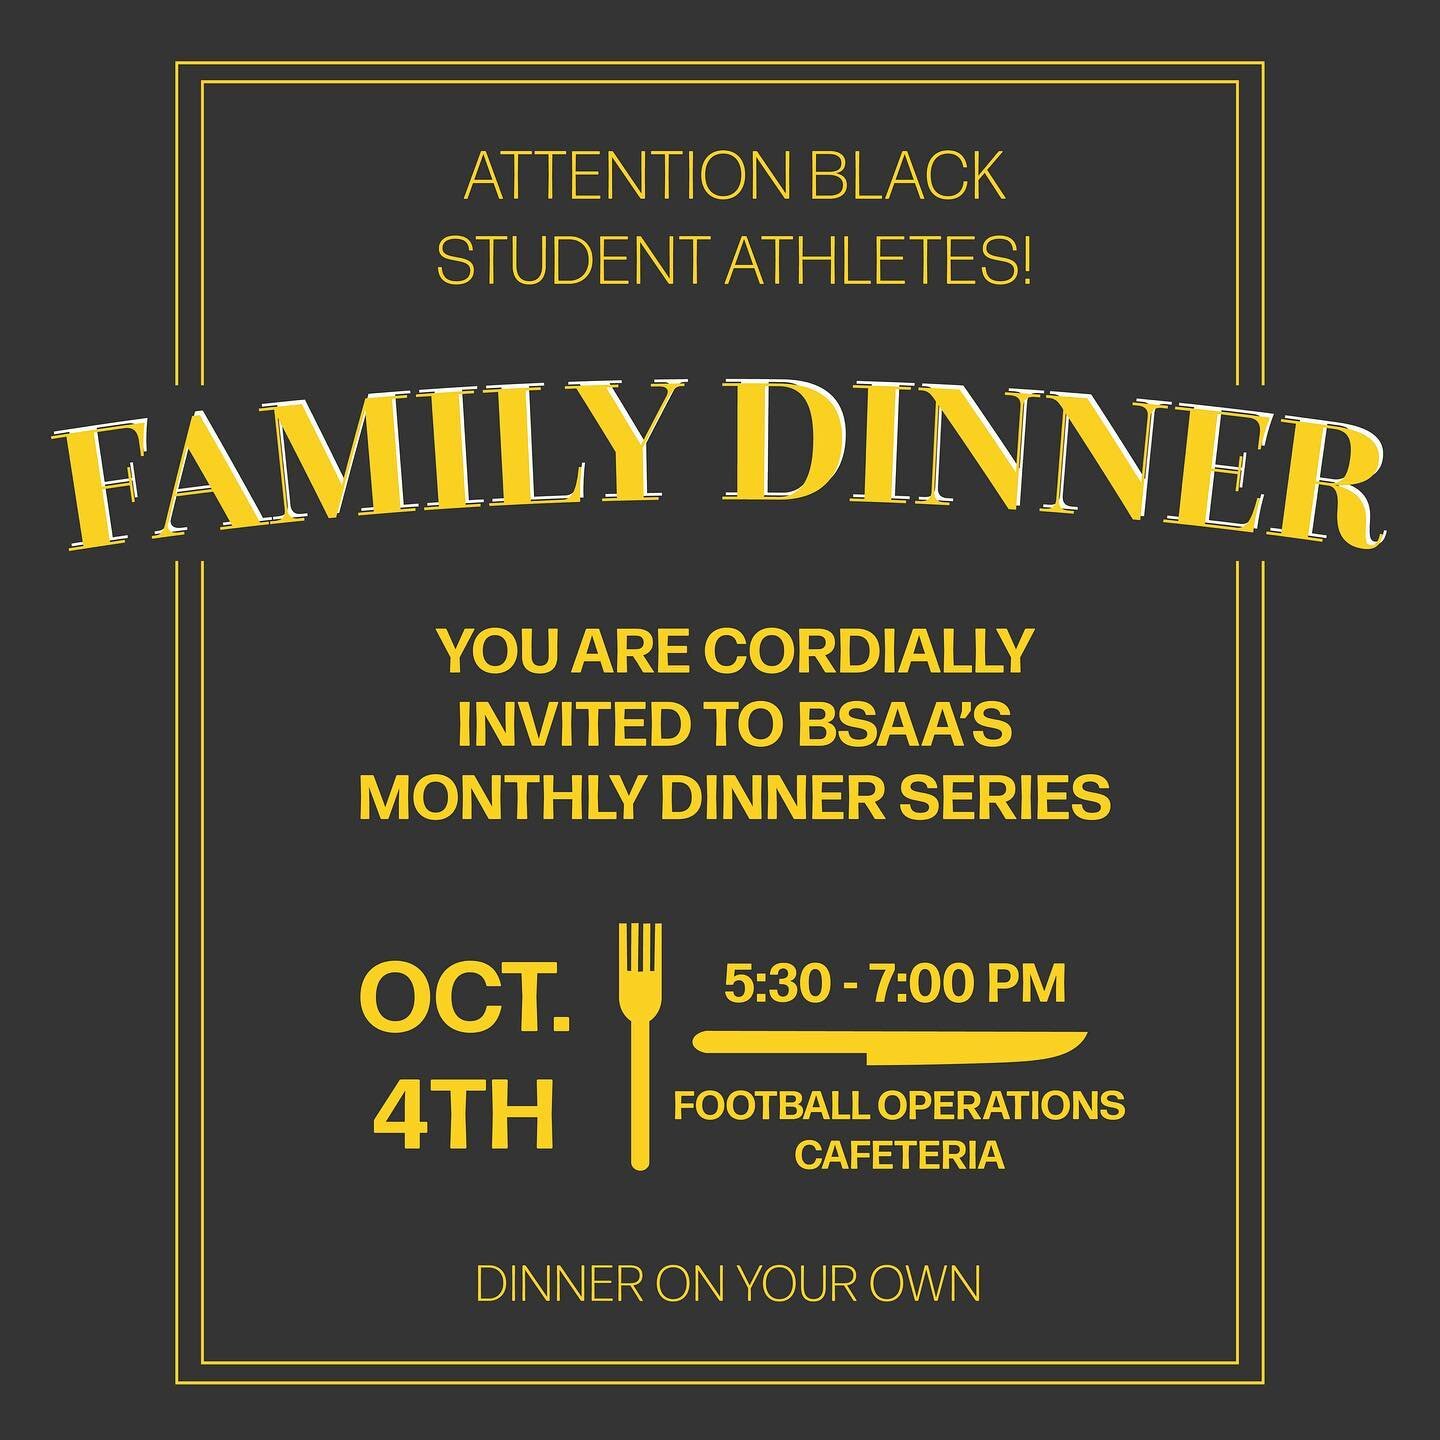 The second BSAA Family Dinner is approaching! If you missed the first one make sure to catch us this time around!! #whoshungry